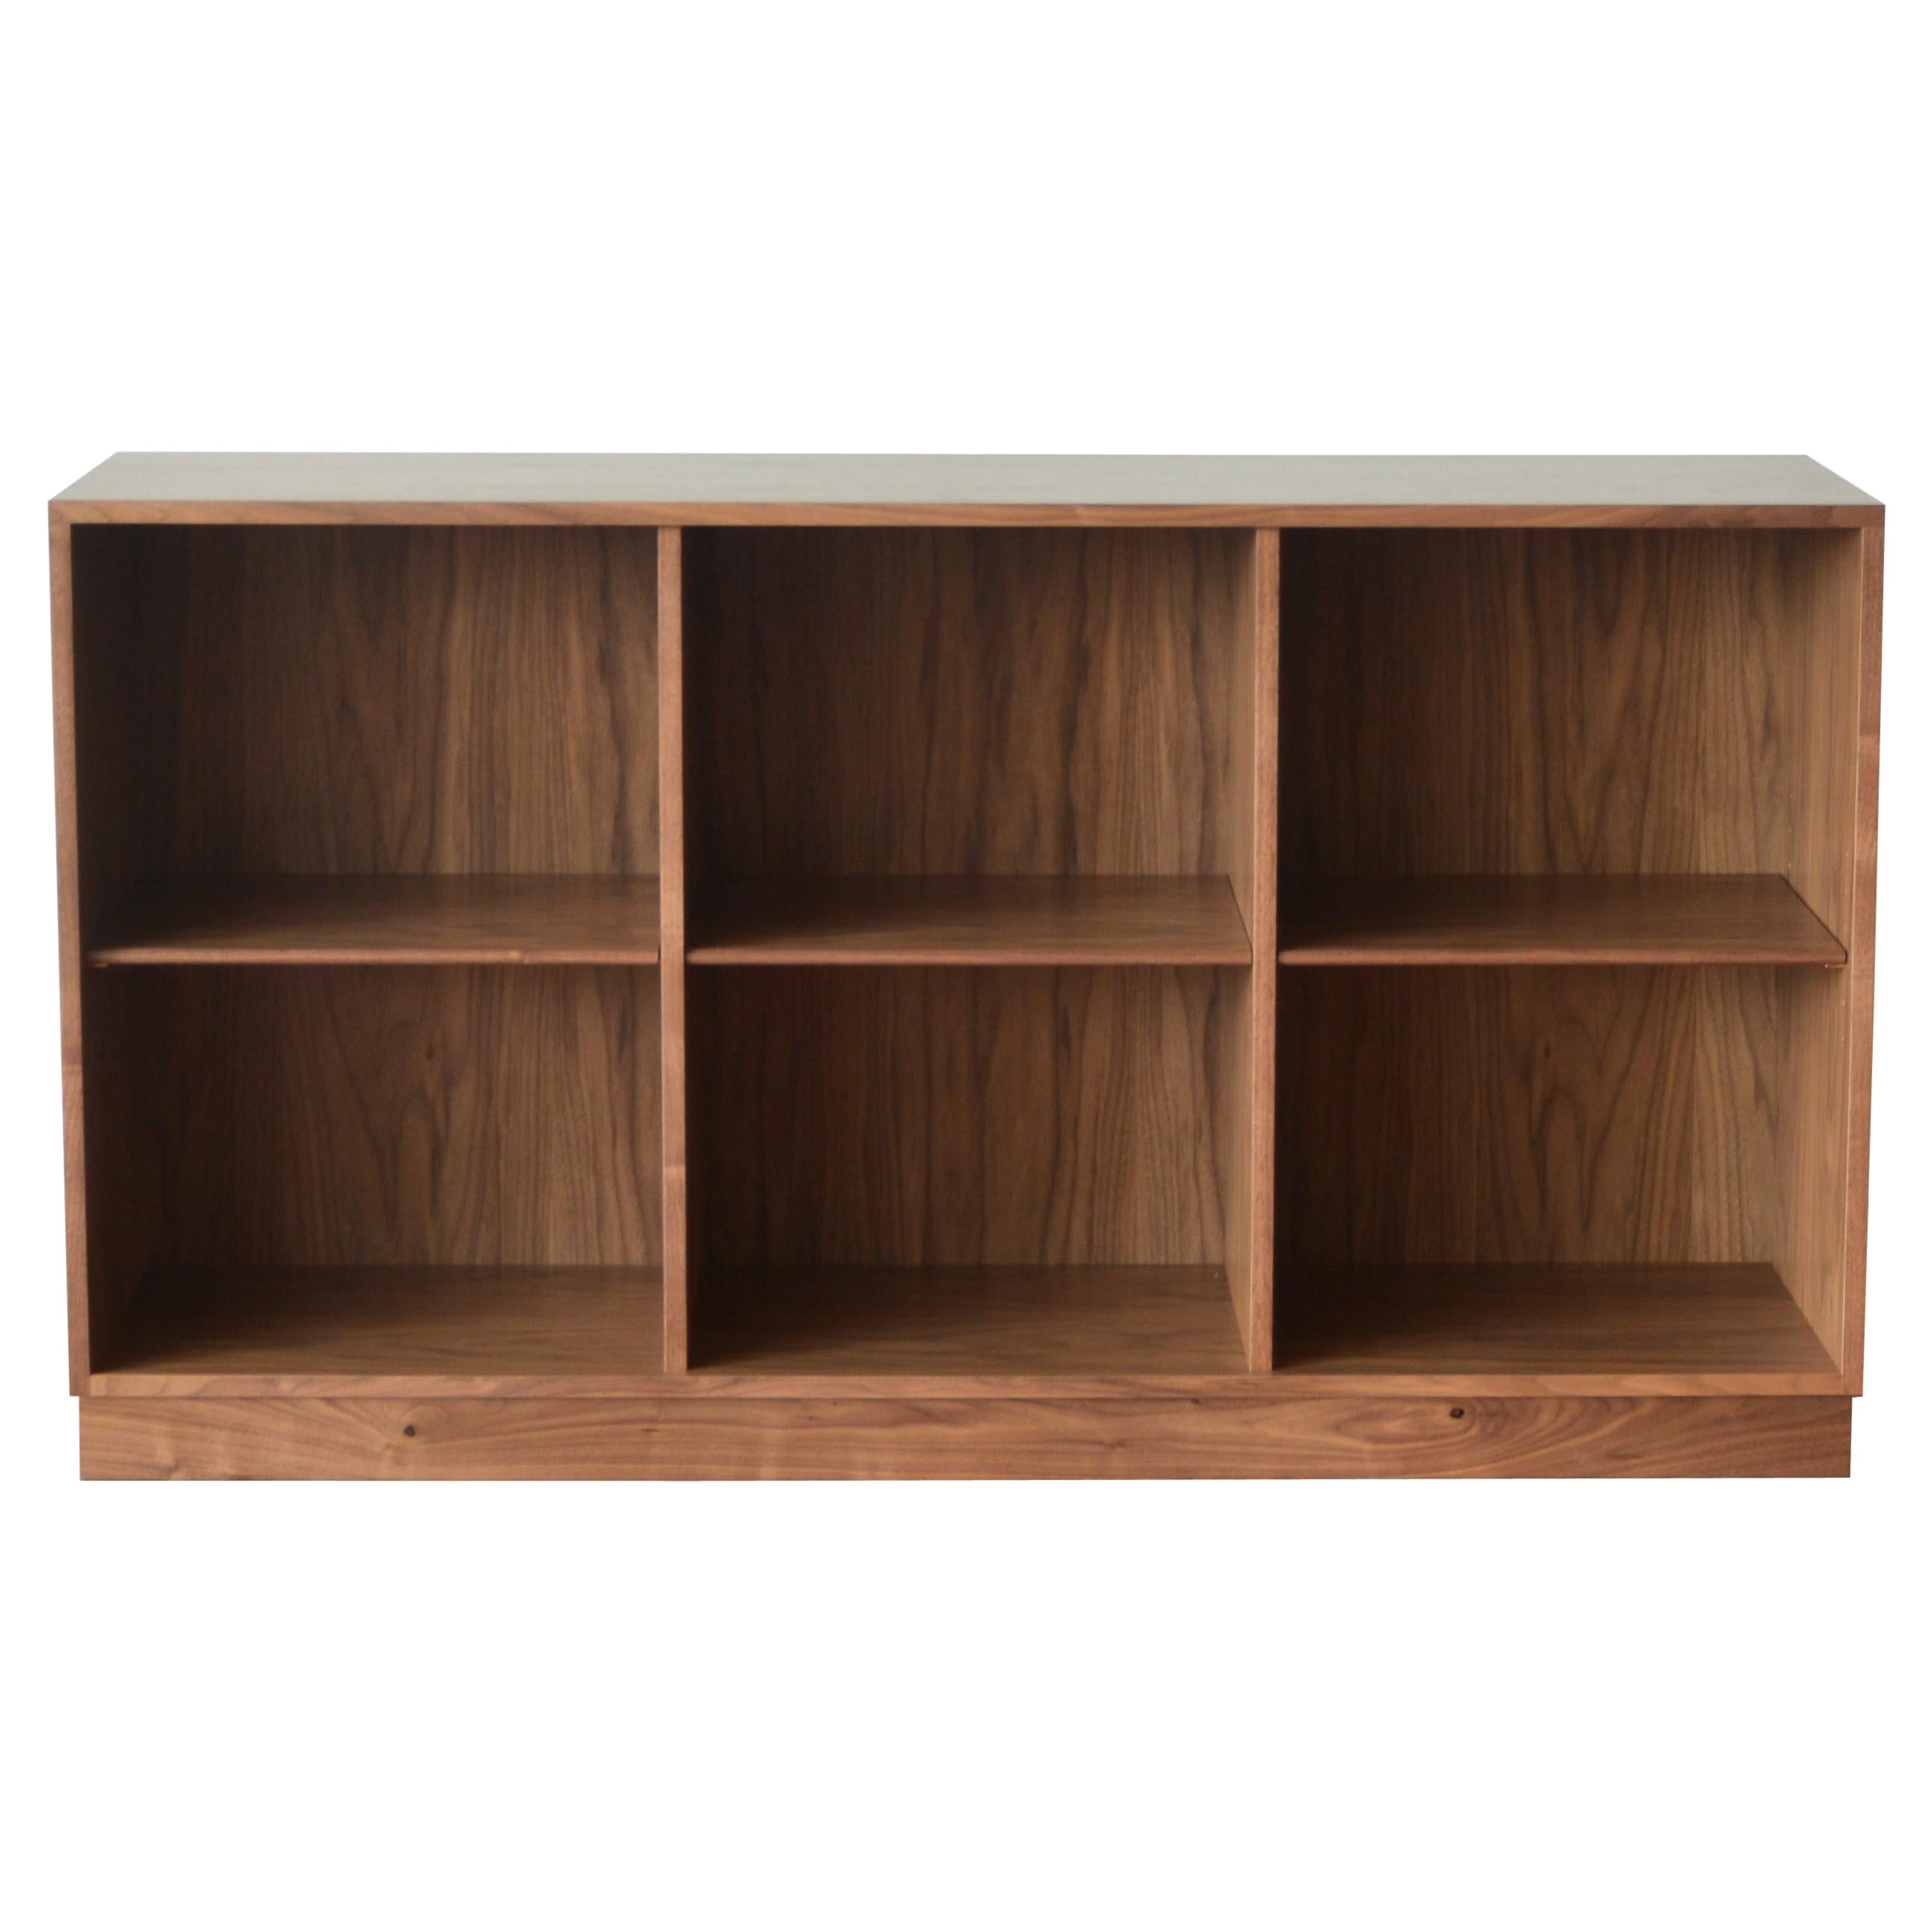 FF08 Low Bookcase in Walnut by Stokes Furniture For Sale